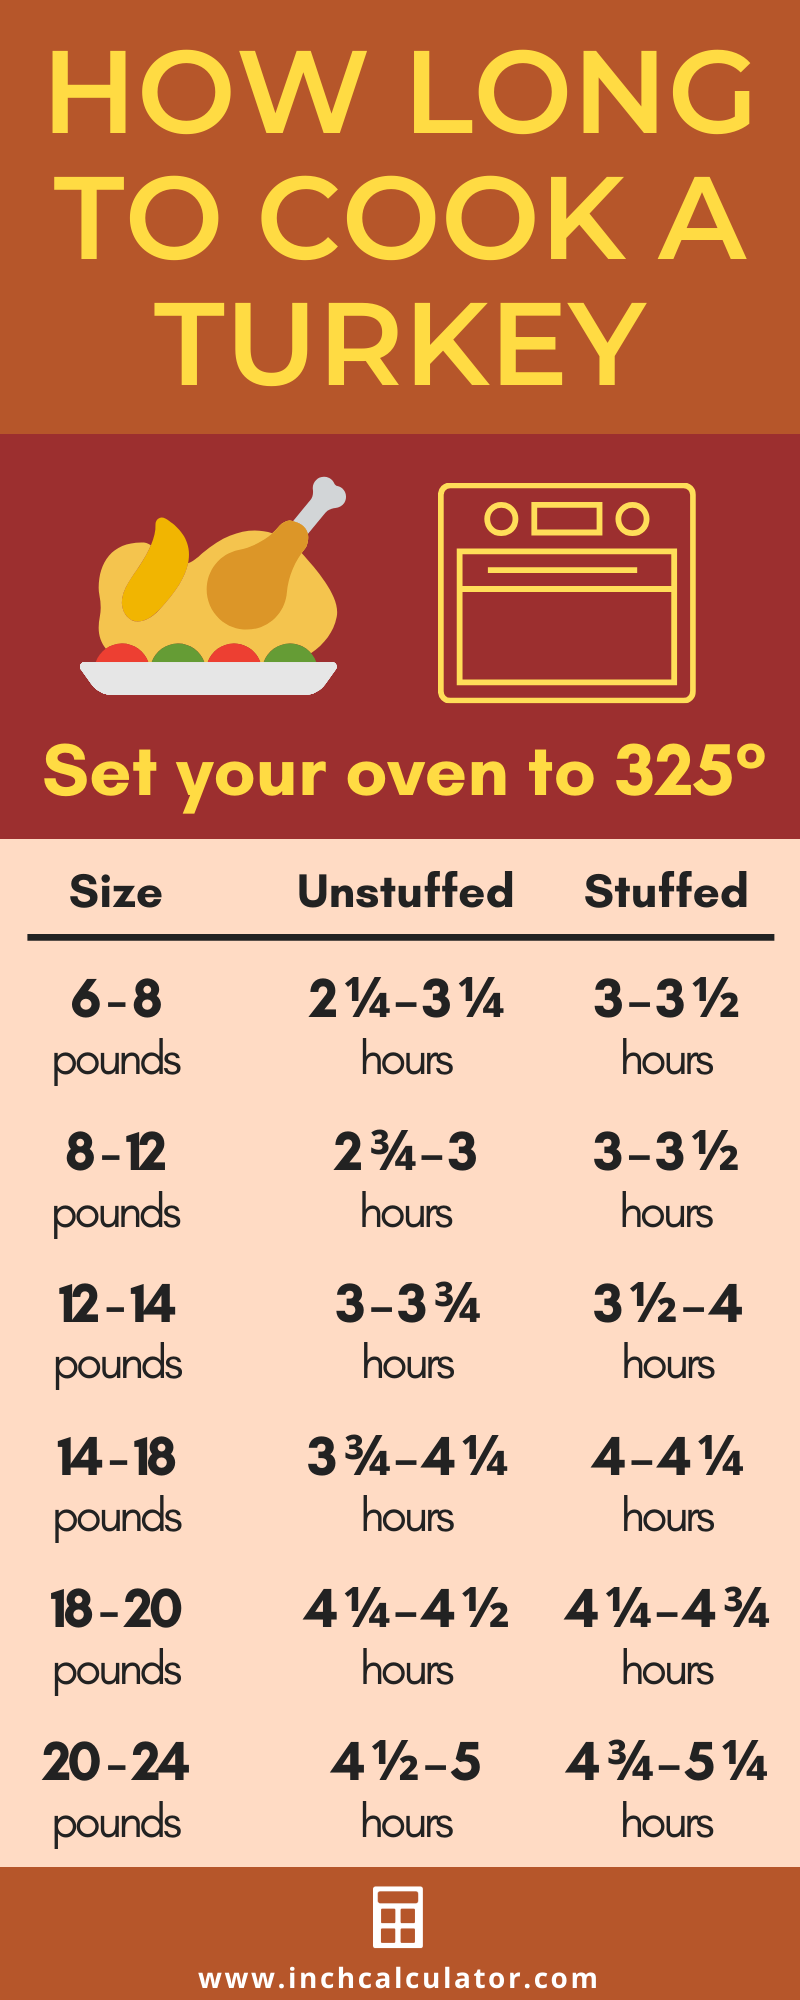 https://www.inchcalculator.com/wp-content/uploads/2019/10/how-long-to-cook-turkey-infographic.png